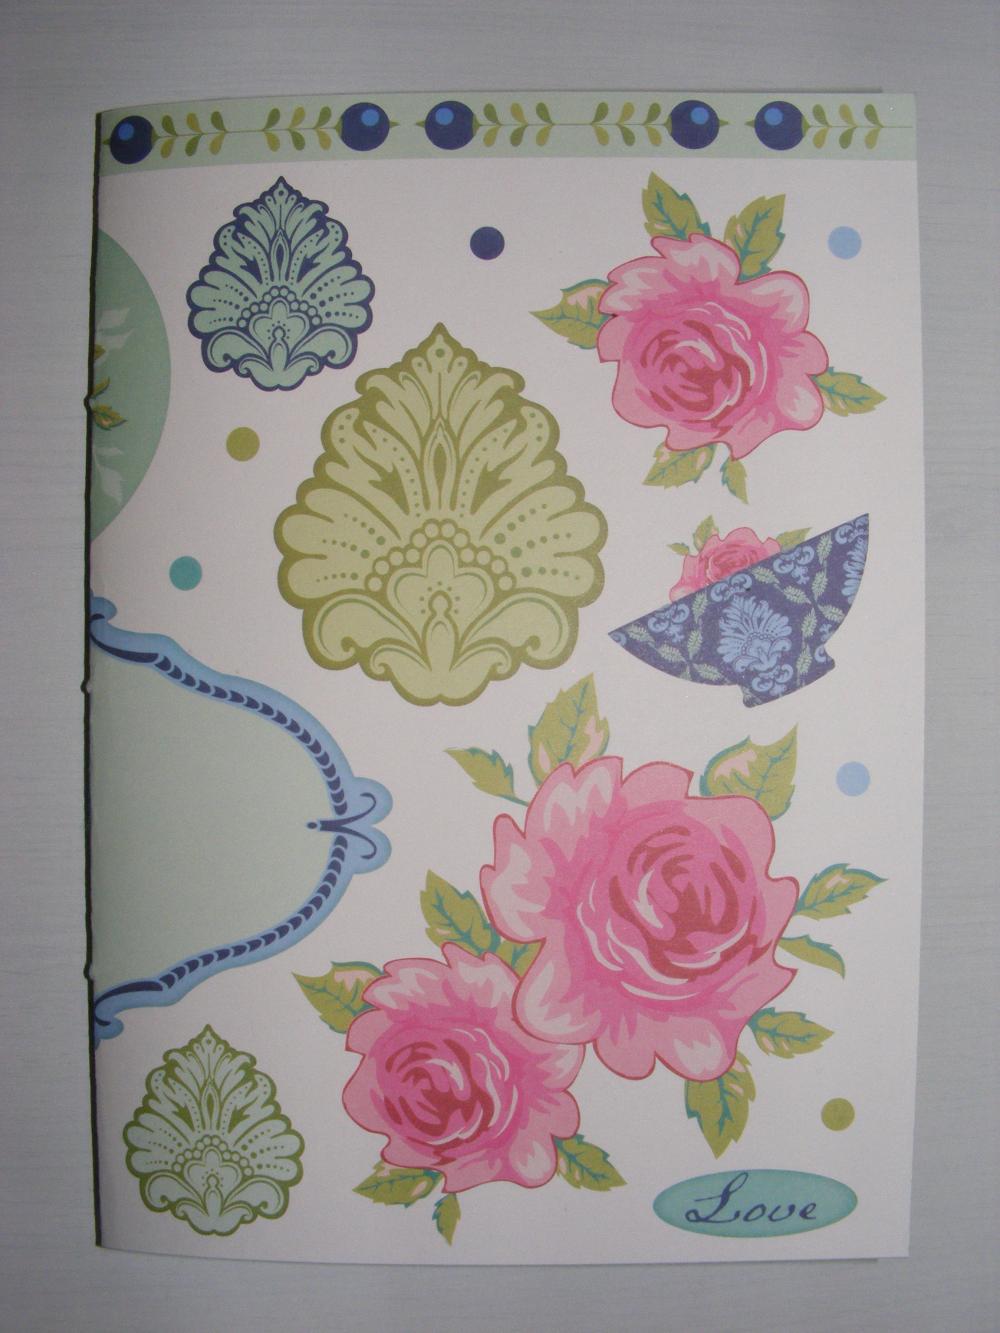 A5 Handmade Notebook With Pink Rose Cover & Plain Coloured Pages In Shades Of Turquoise And Pink